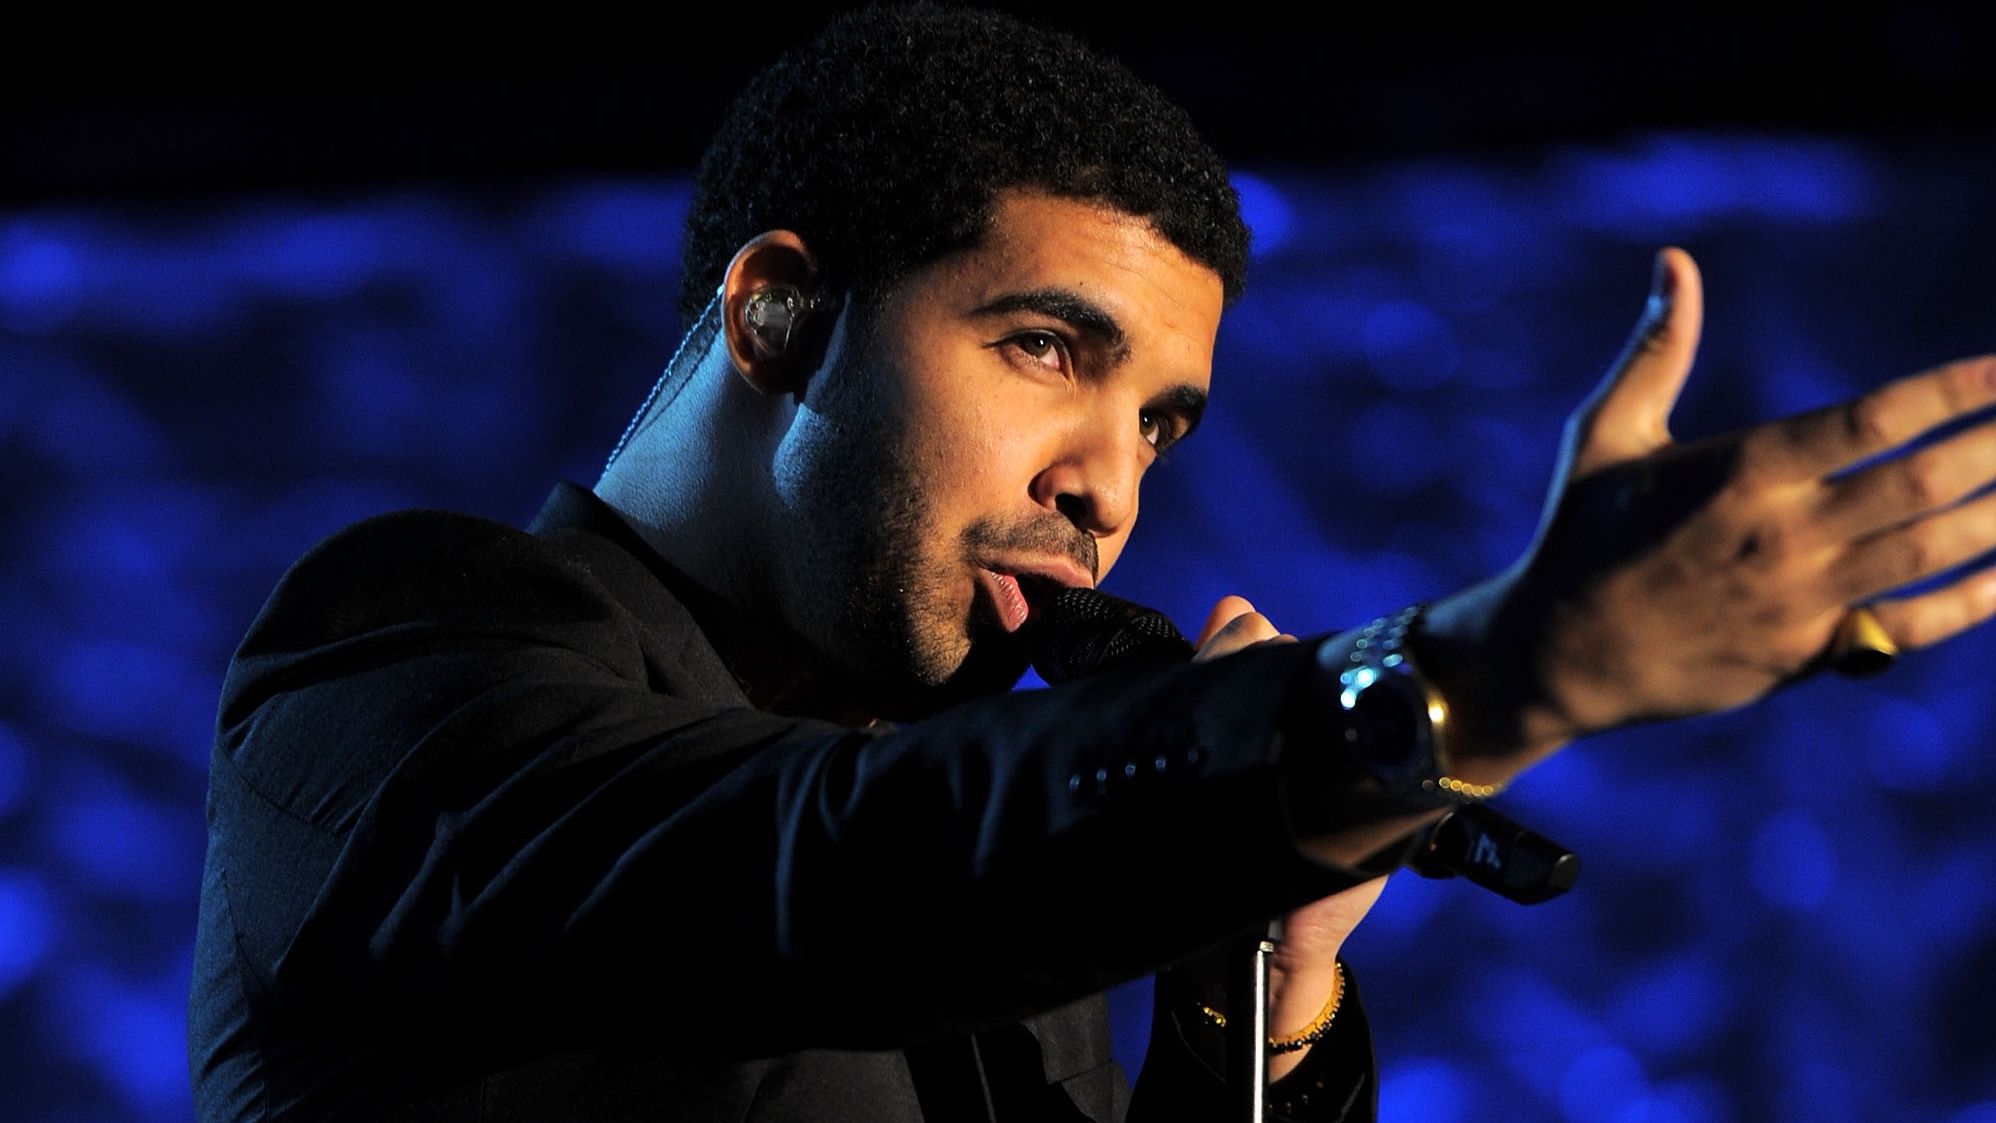 In his 2011 song "The Motto," Drake embraced the new word, "yolo," which has been targeted by a university hit list.